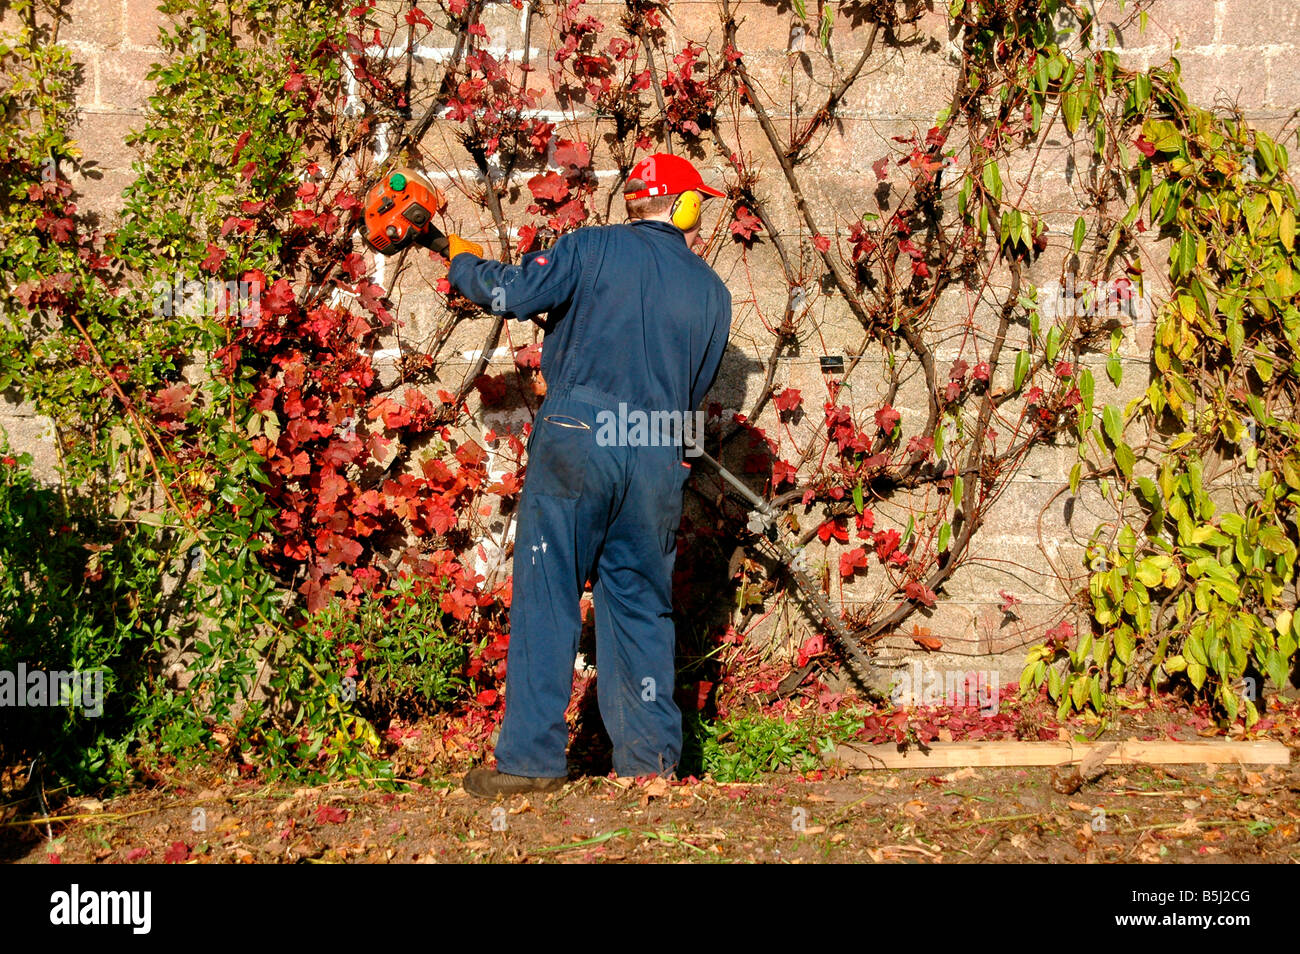 A gardener uses an electrical trimmer on Virginia creeper. Crathes castle grounds, Scotland. Stock Photo